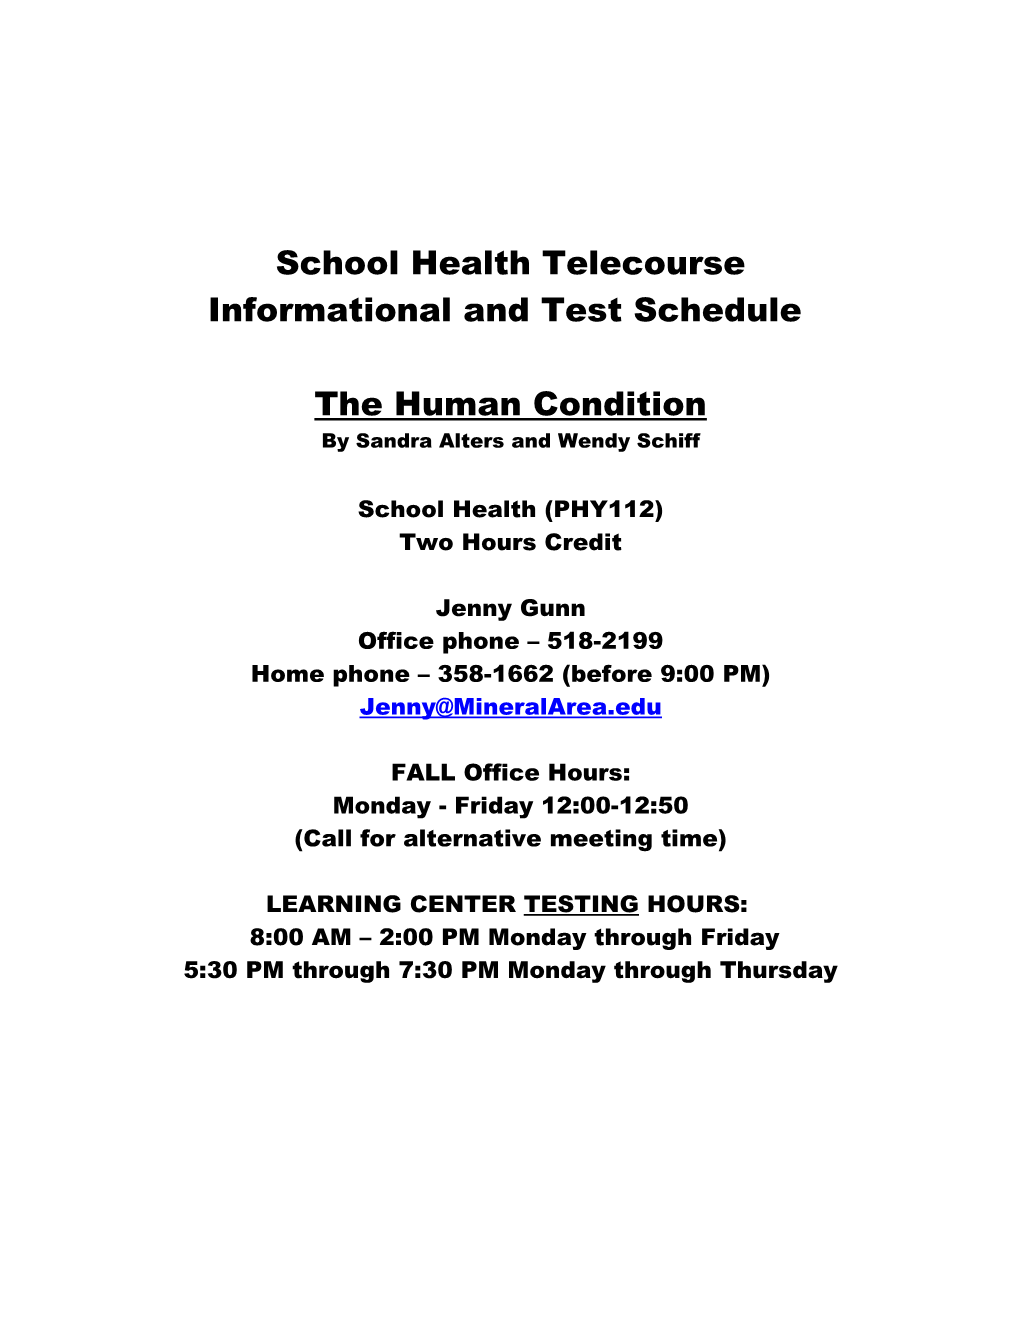 Informational and Test Schedule